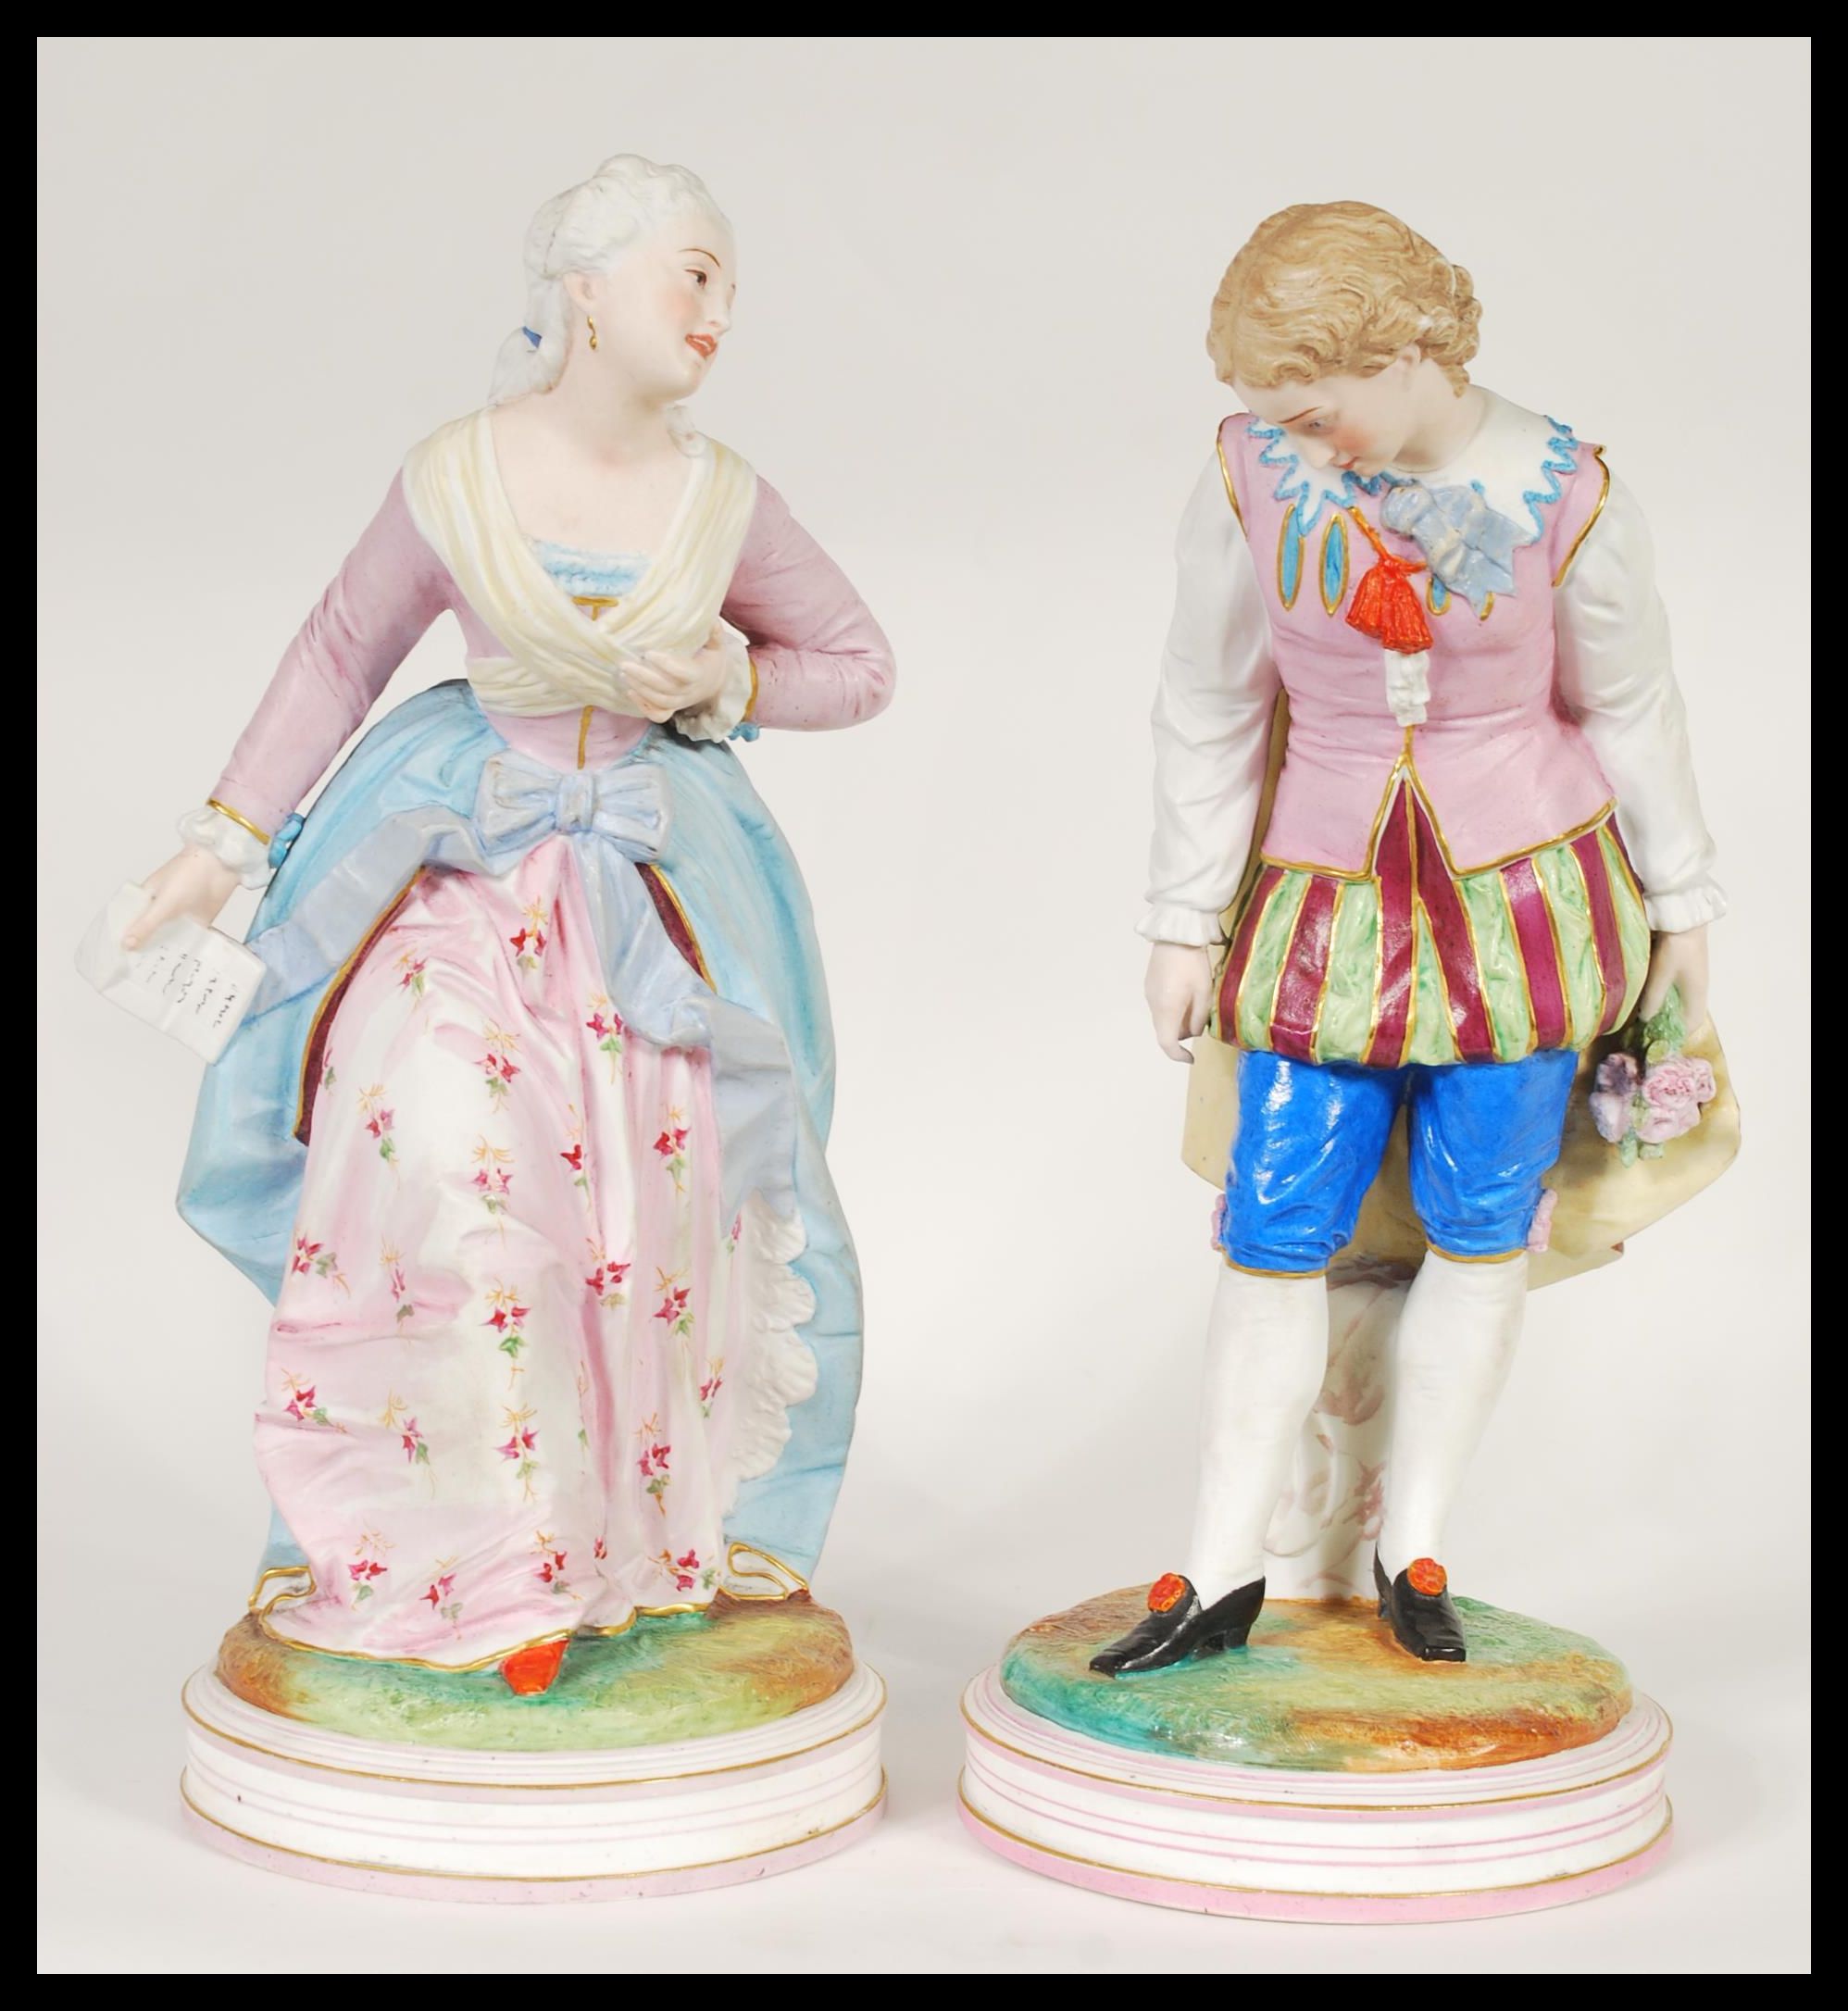 A pair of early 20th Century French Continental Bisque ware figurines depicting a courting couple.